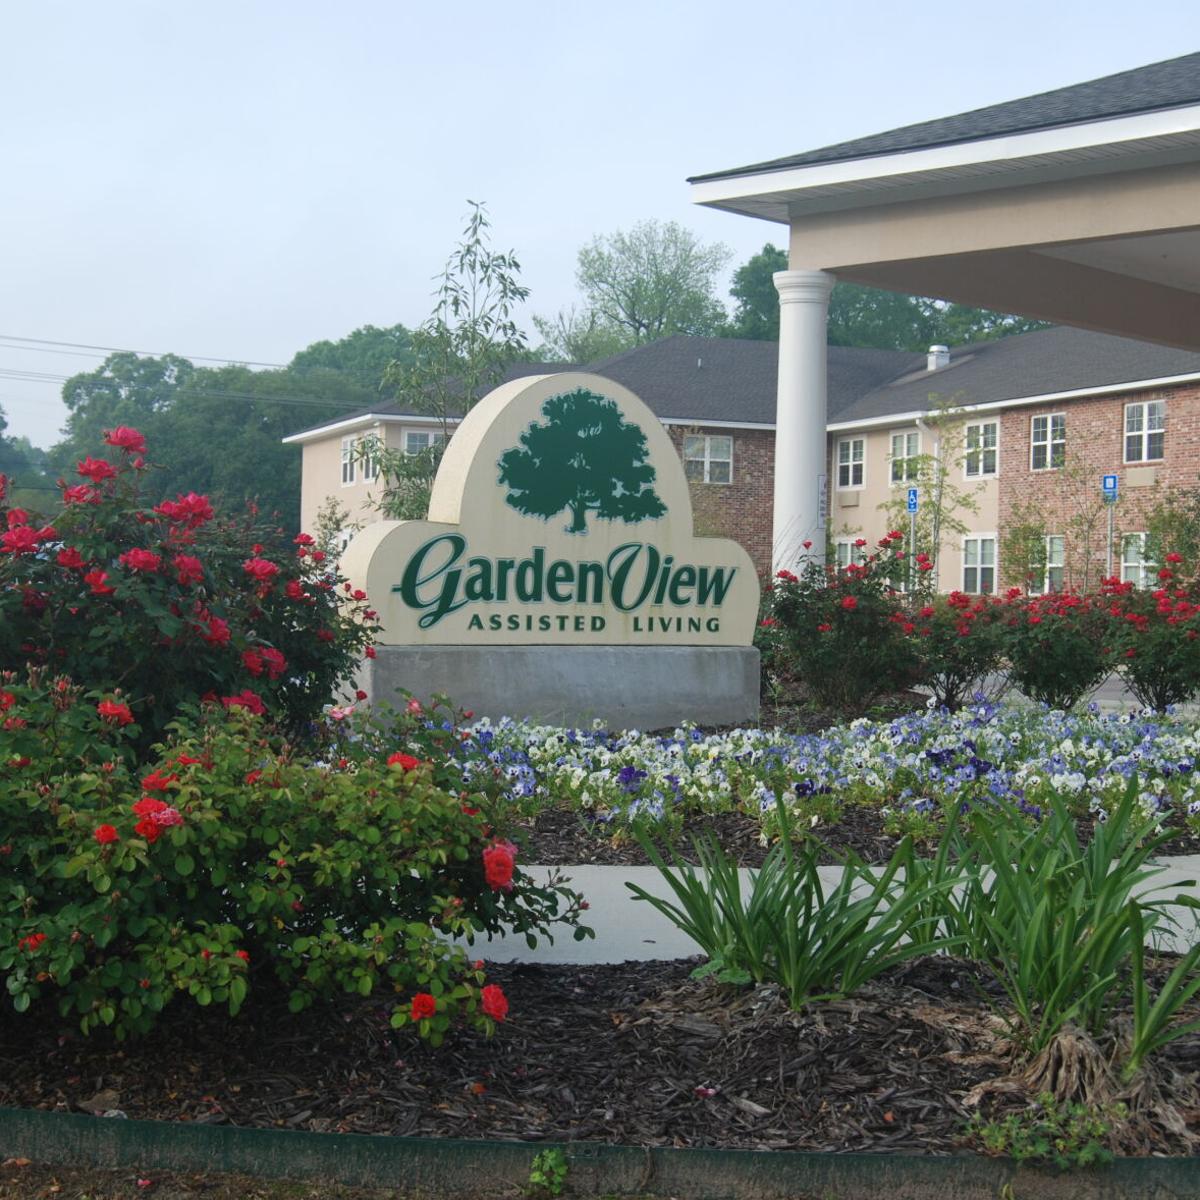 Garden View Continues To Emphasize Safety While Keeping Residents Active And Engaged Sponsored Garden View Theadvocatecom